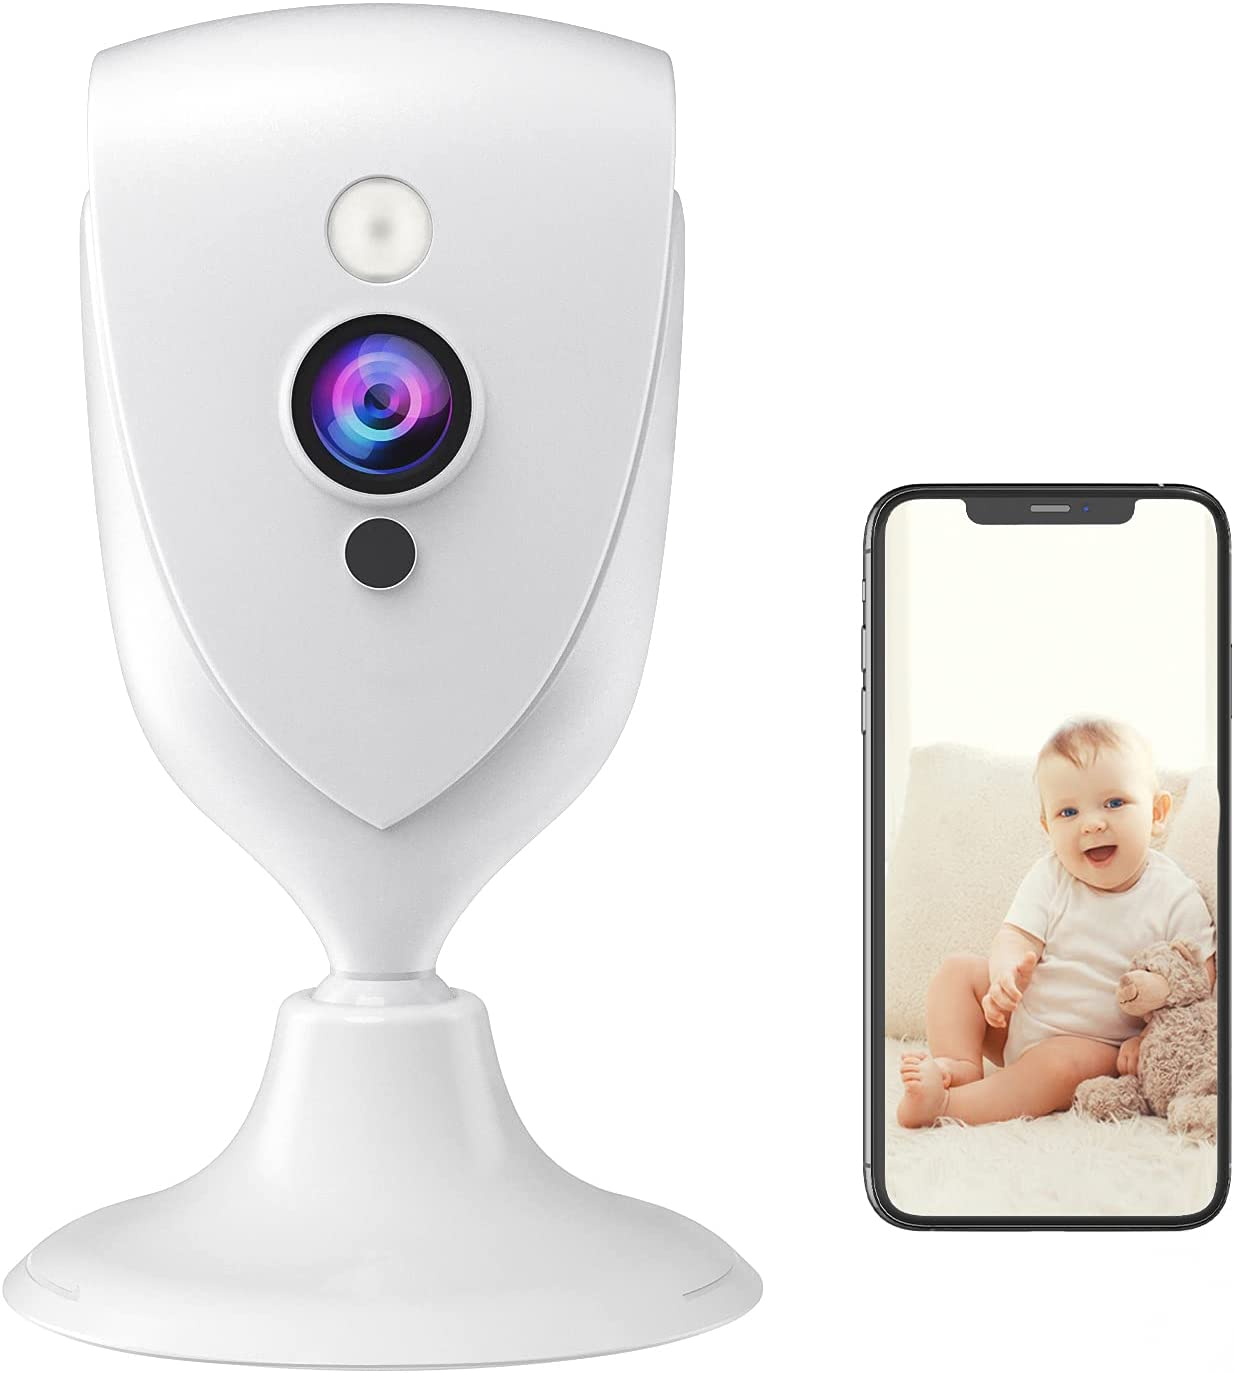 Pet Camera,1080P Mini Baby Monitor with Camera and Audio,Night Vision, 2-Way Audio,Motion Alarm for Home Security Camera,Watch Live Streaming Video Anywhere,Cloud Storage,Work with 2.4G Wifi